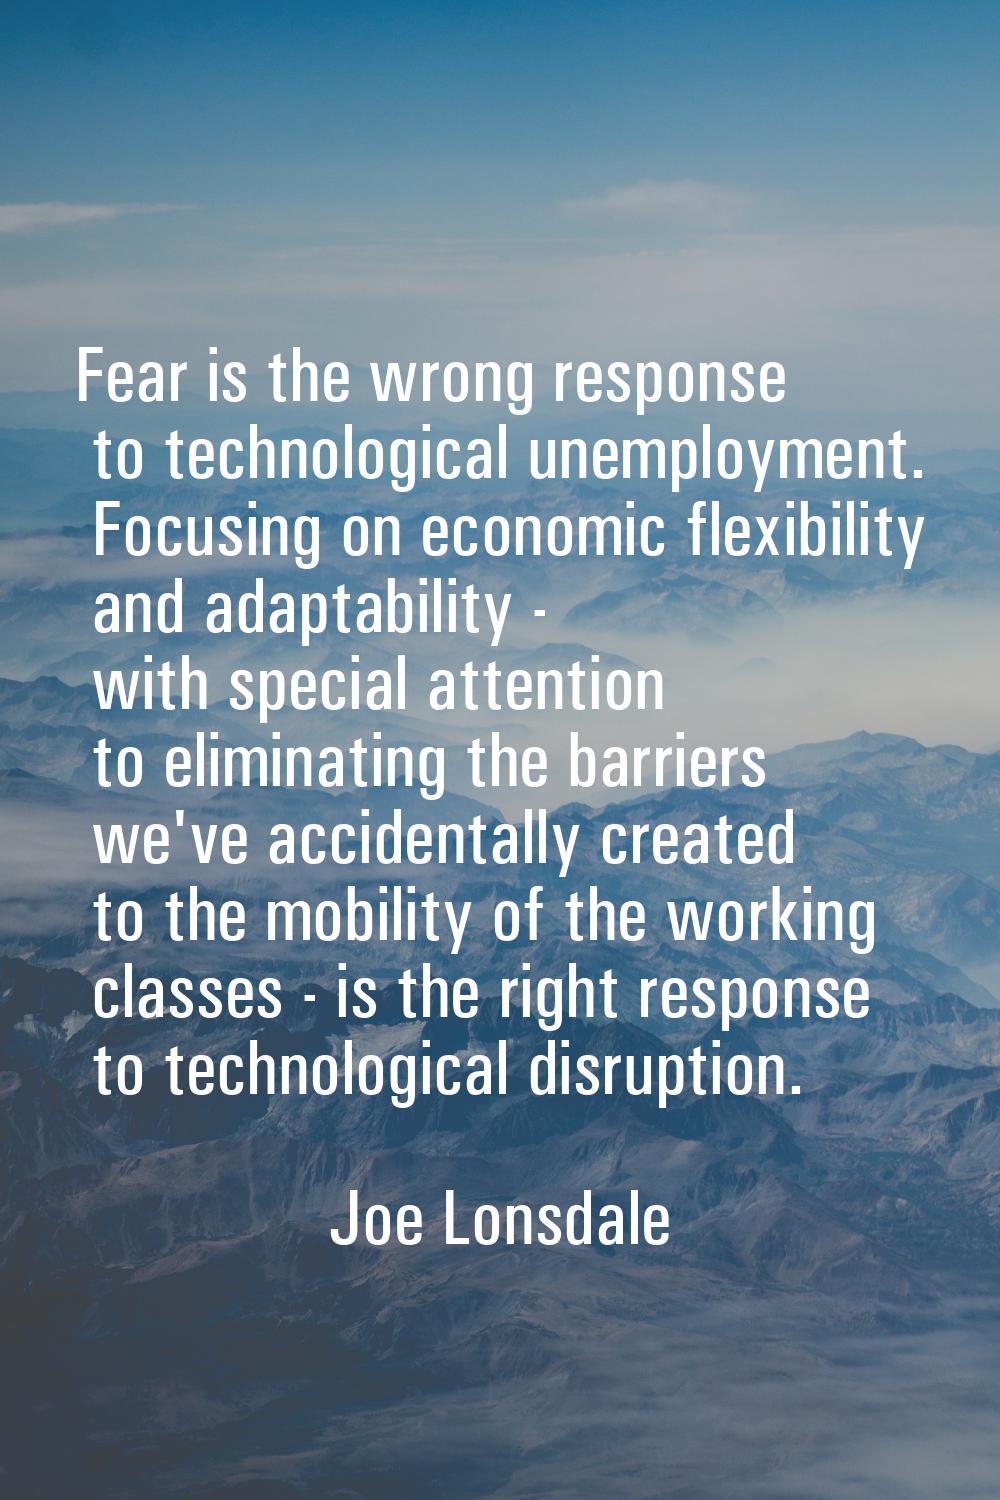 Fear is the wrong response to technological unemployment. Focusing on economic flexibility and adap